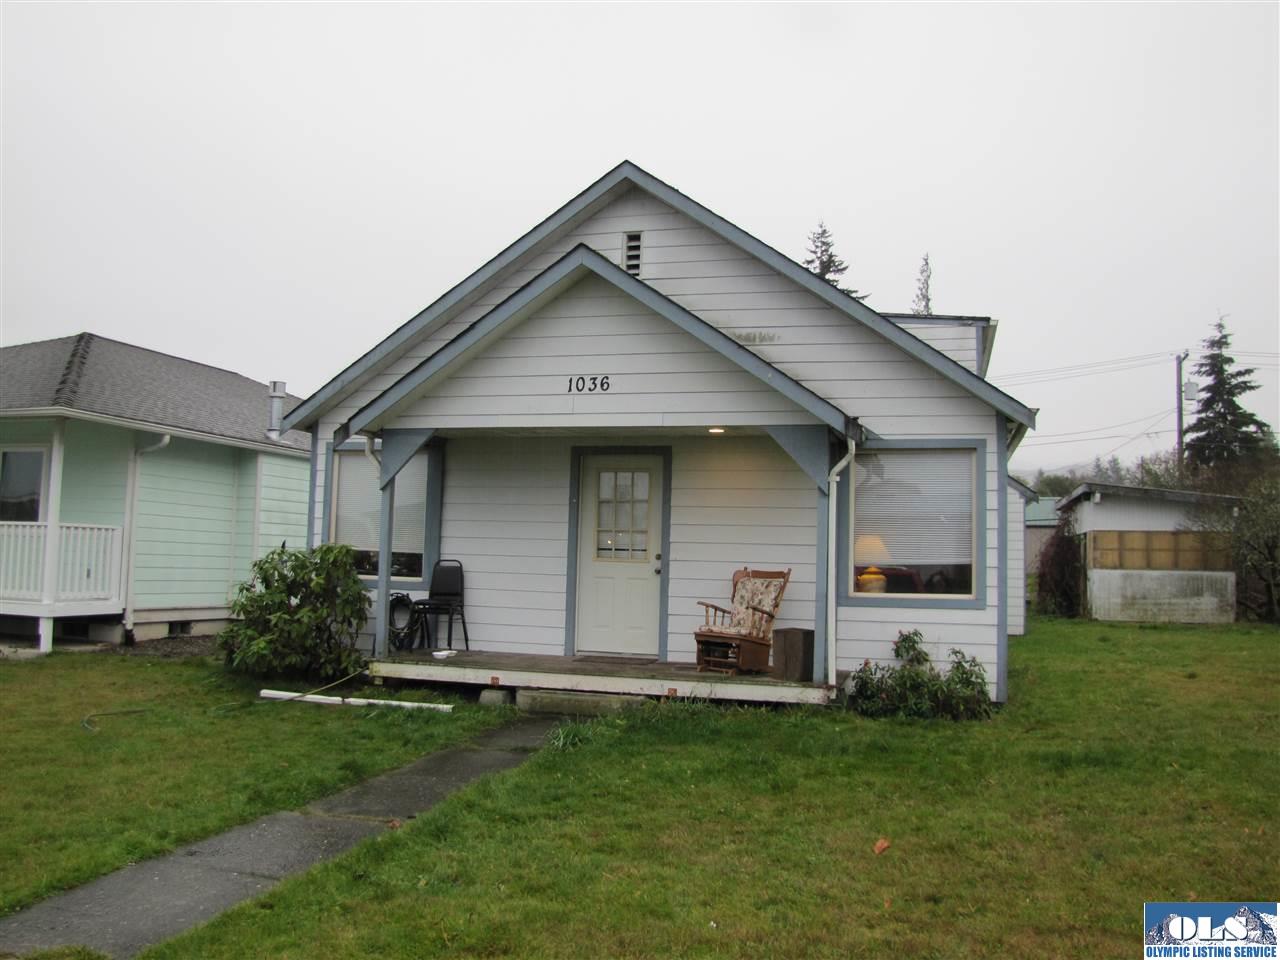 Real Estate In The City Of Port Angeles